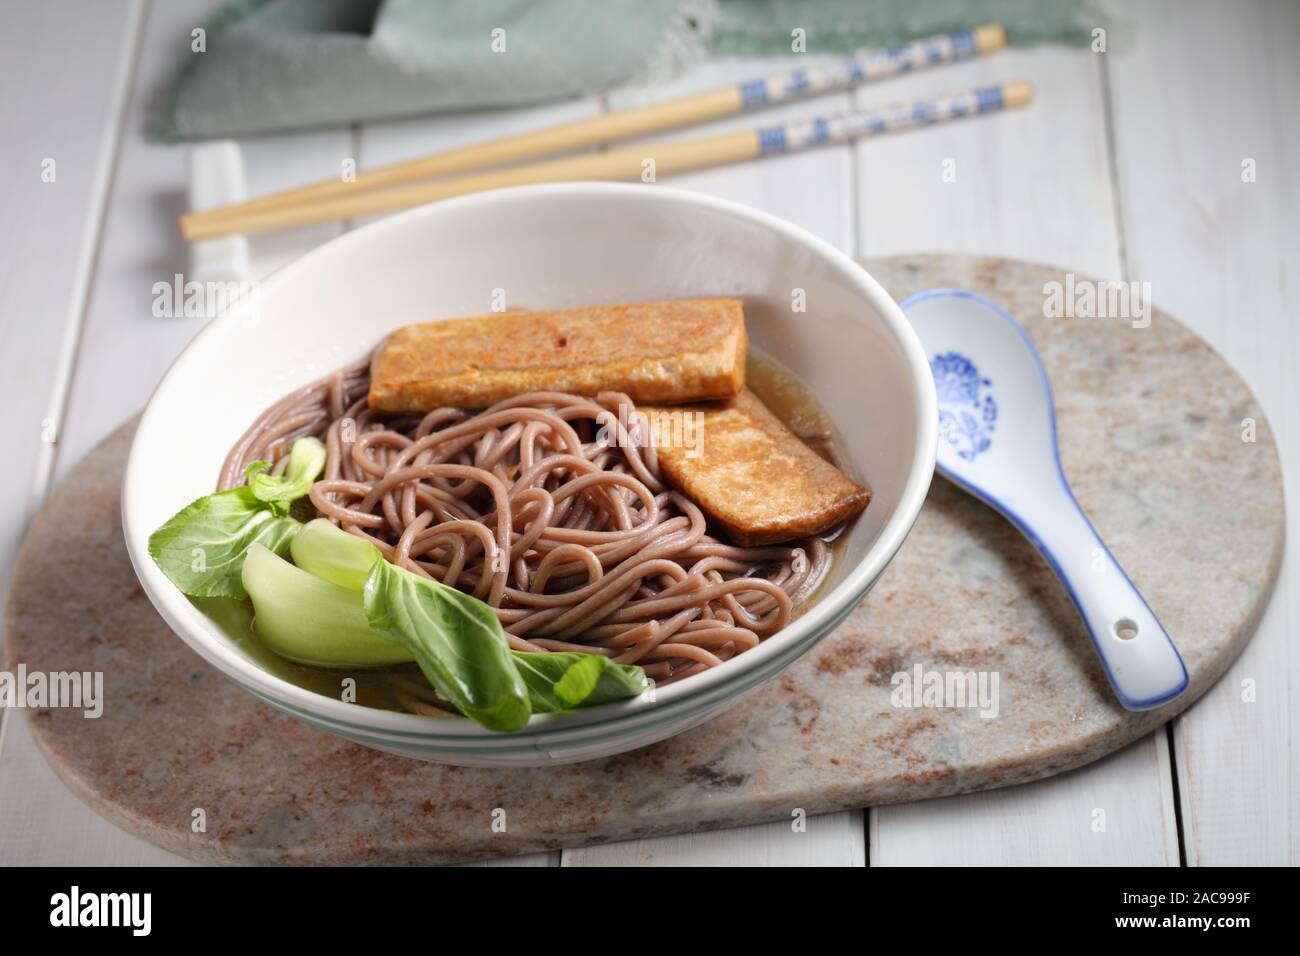 Portion of Soba noodle soup with slices of fried tofu and leafs of bok choy Stock Photo